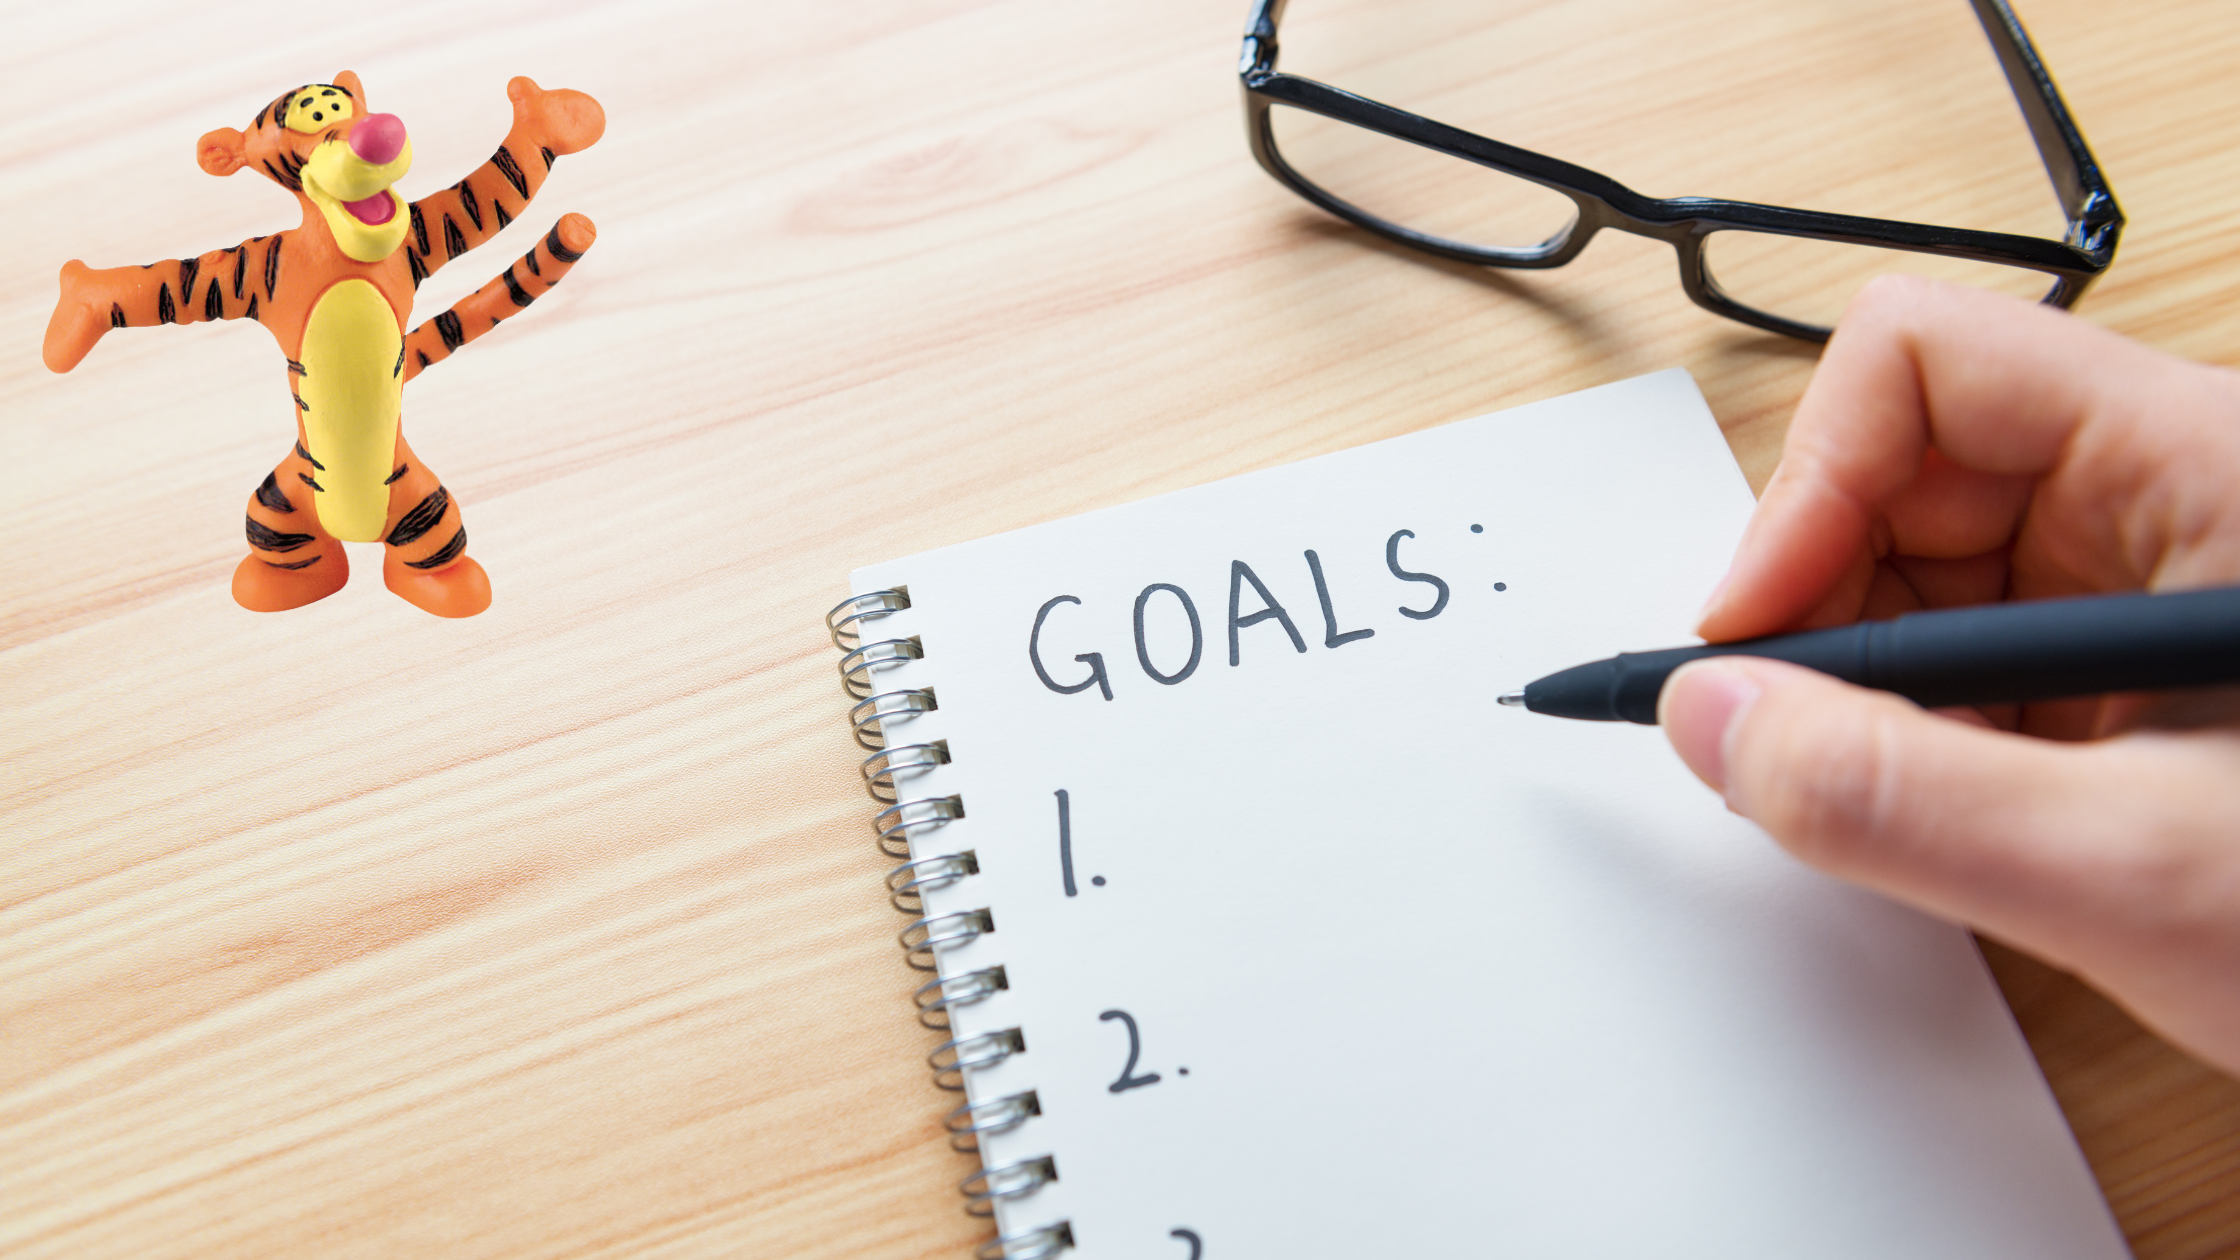 3 Ways To Optimise Your Goals And Have More Fun